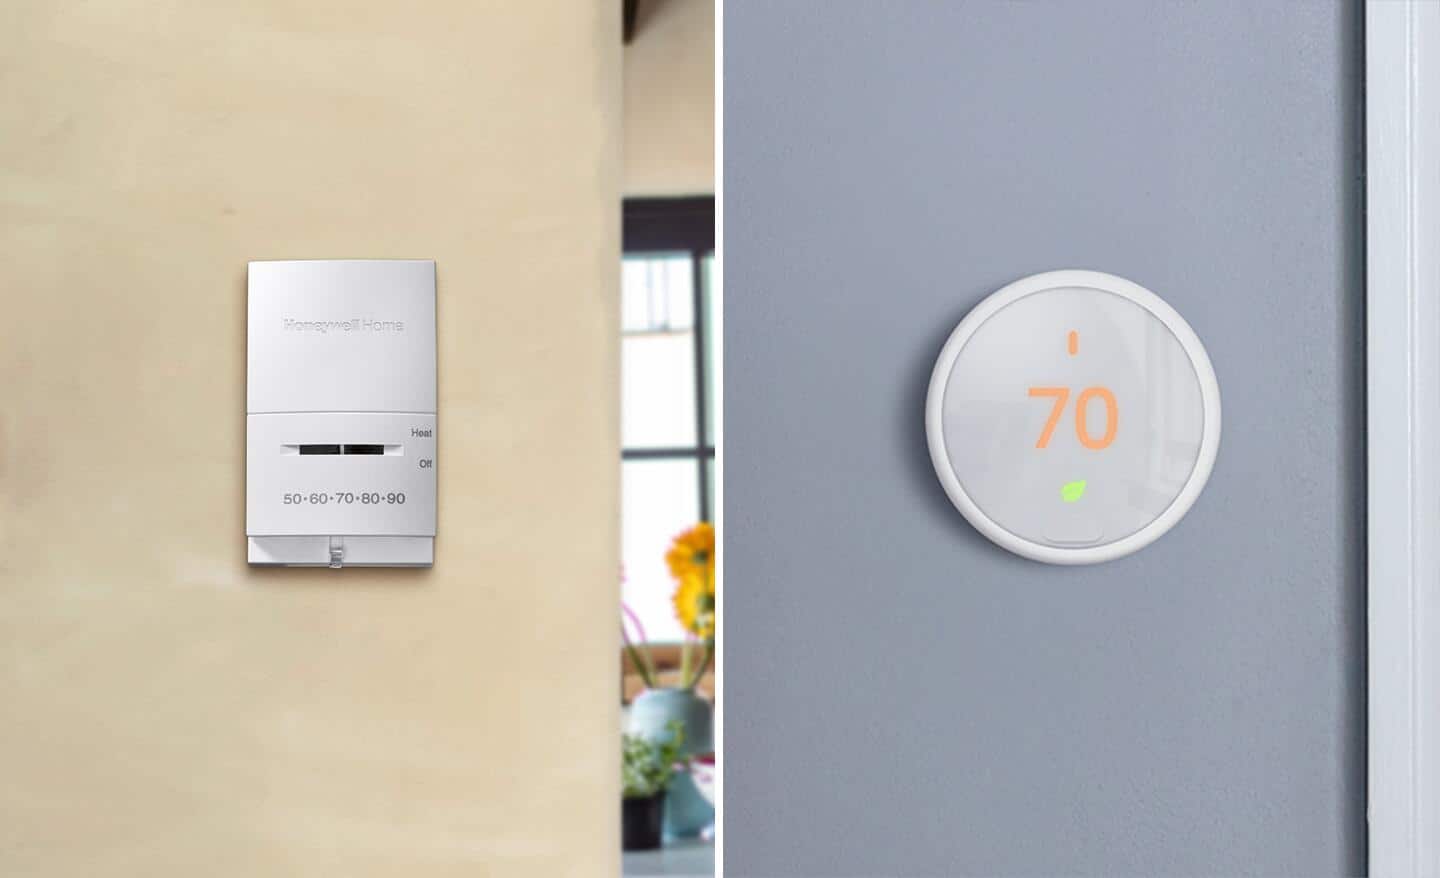 A side by side image of an analog thermostat and a digital thermostat.